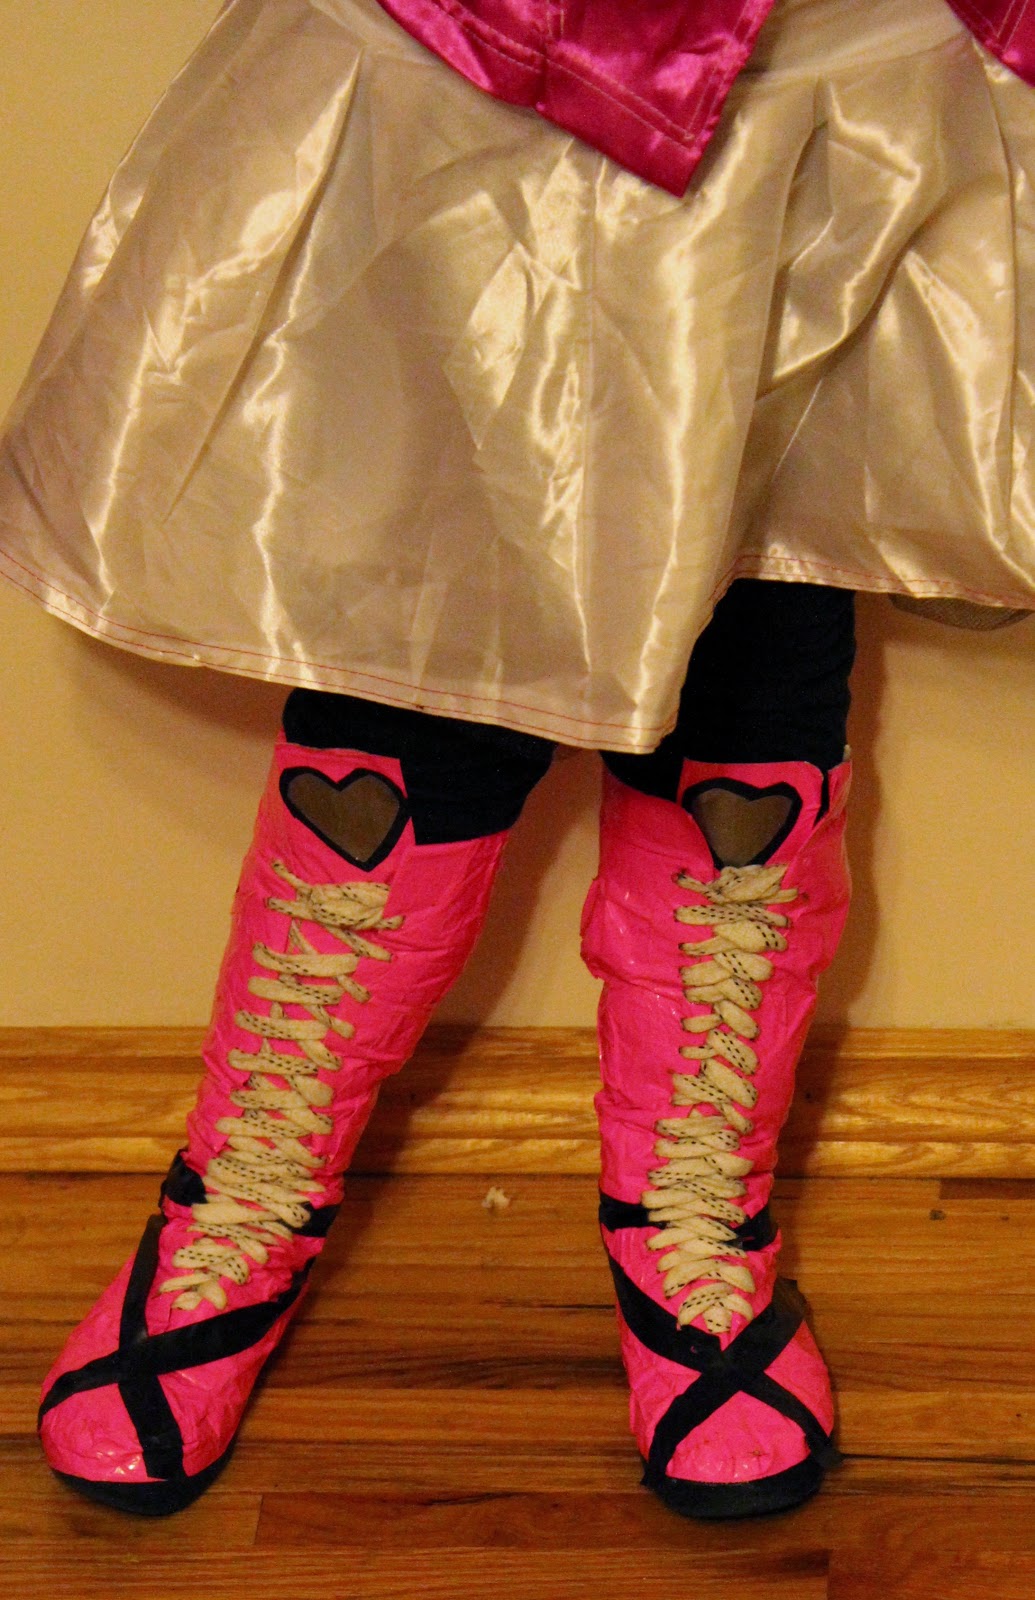 Welcome to Crazy Town: Draculaura Boots